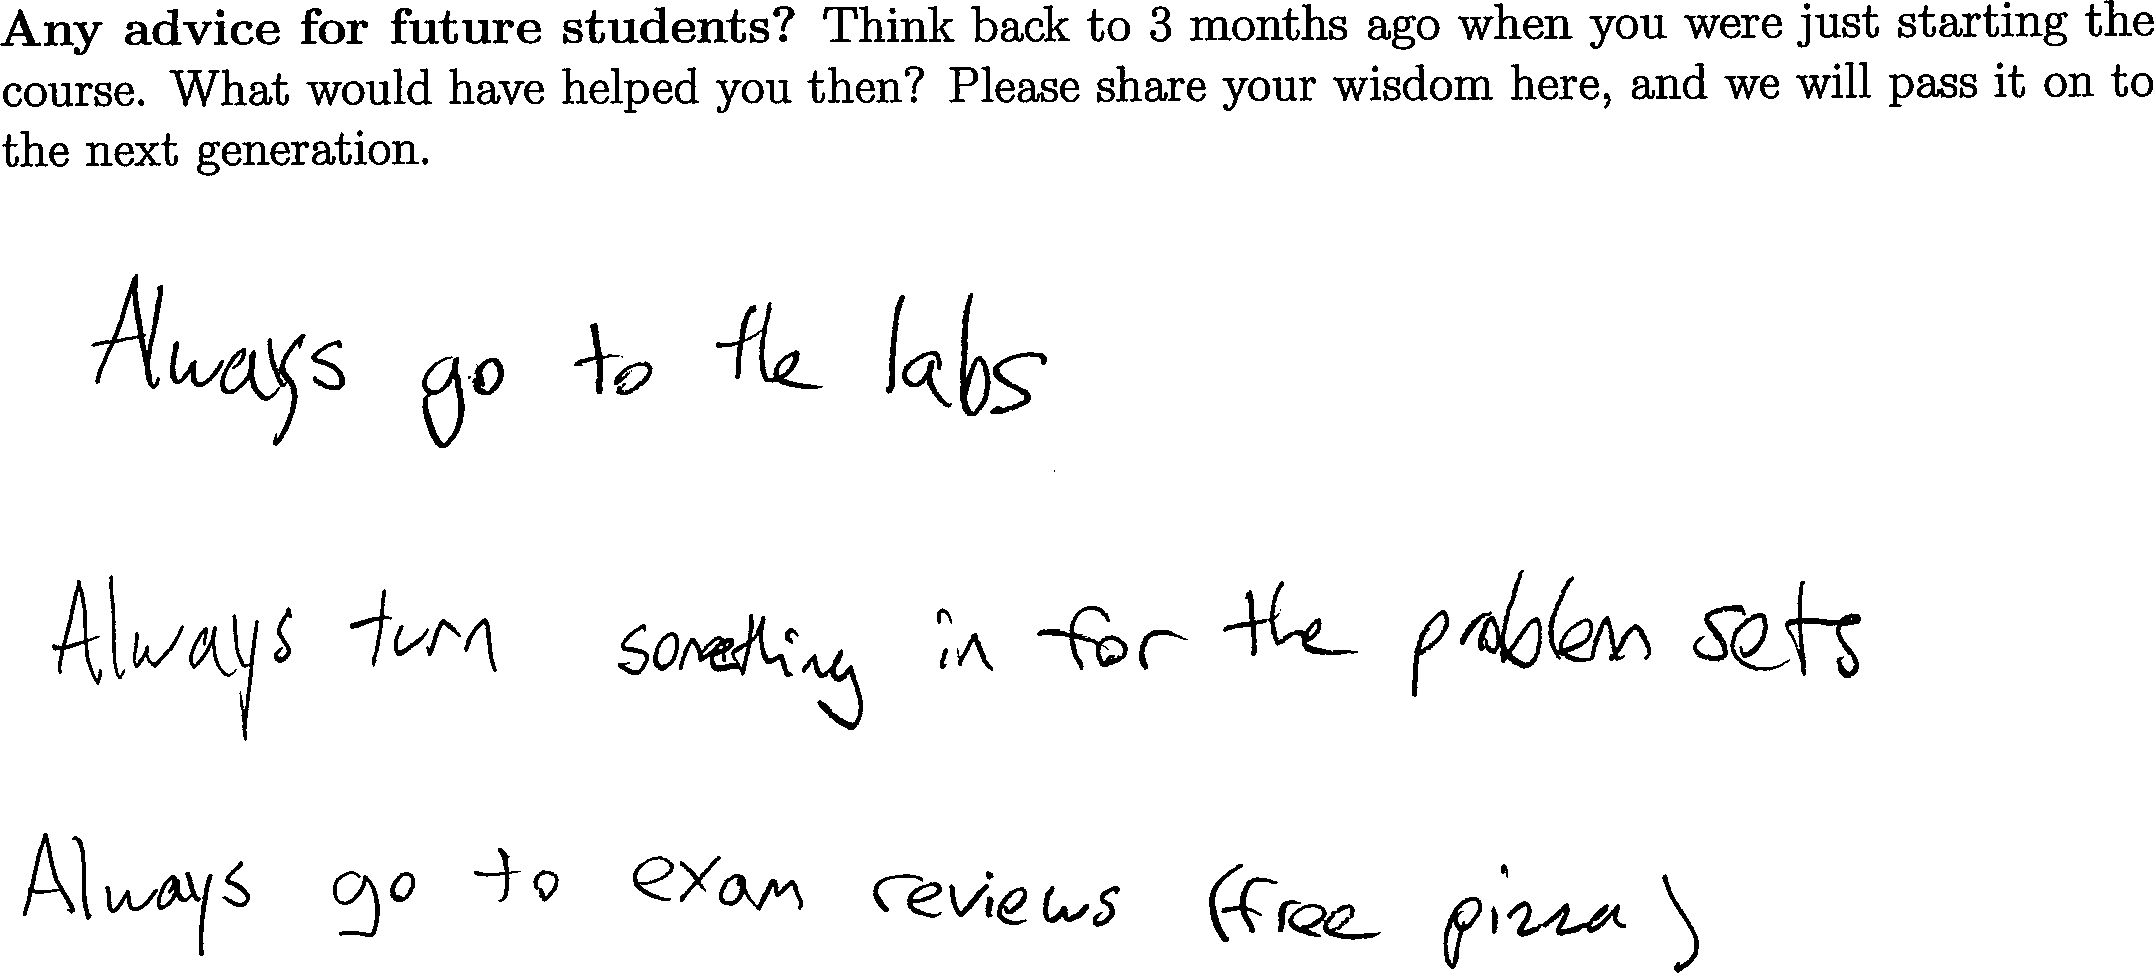 Always go to the labs. Always turn something in for the problem sets. Always go to exam reviews (free pizza).